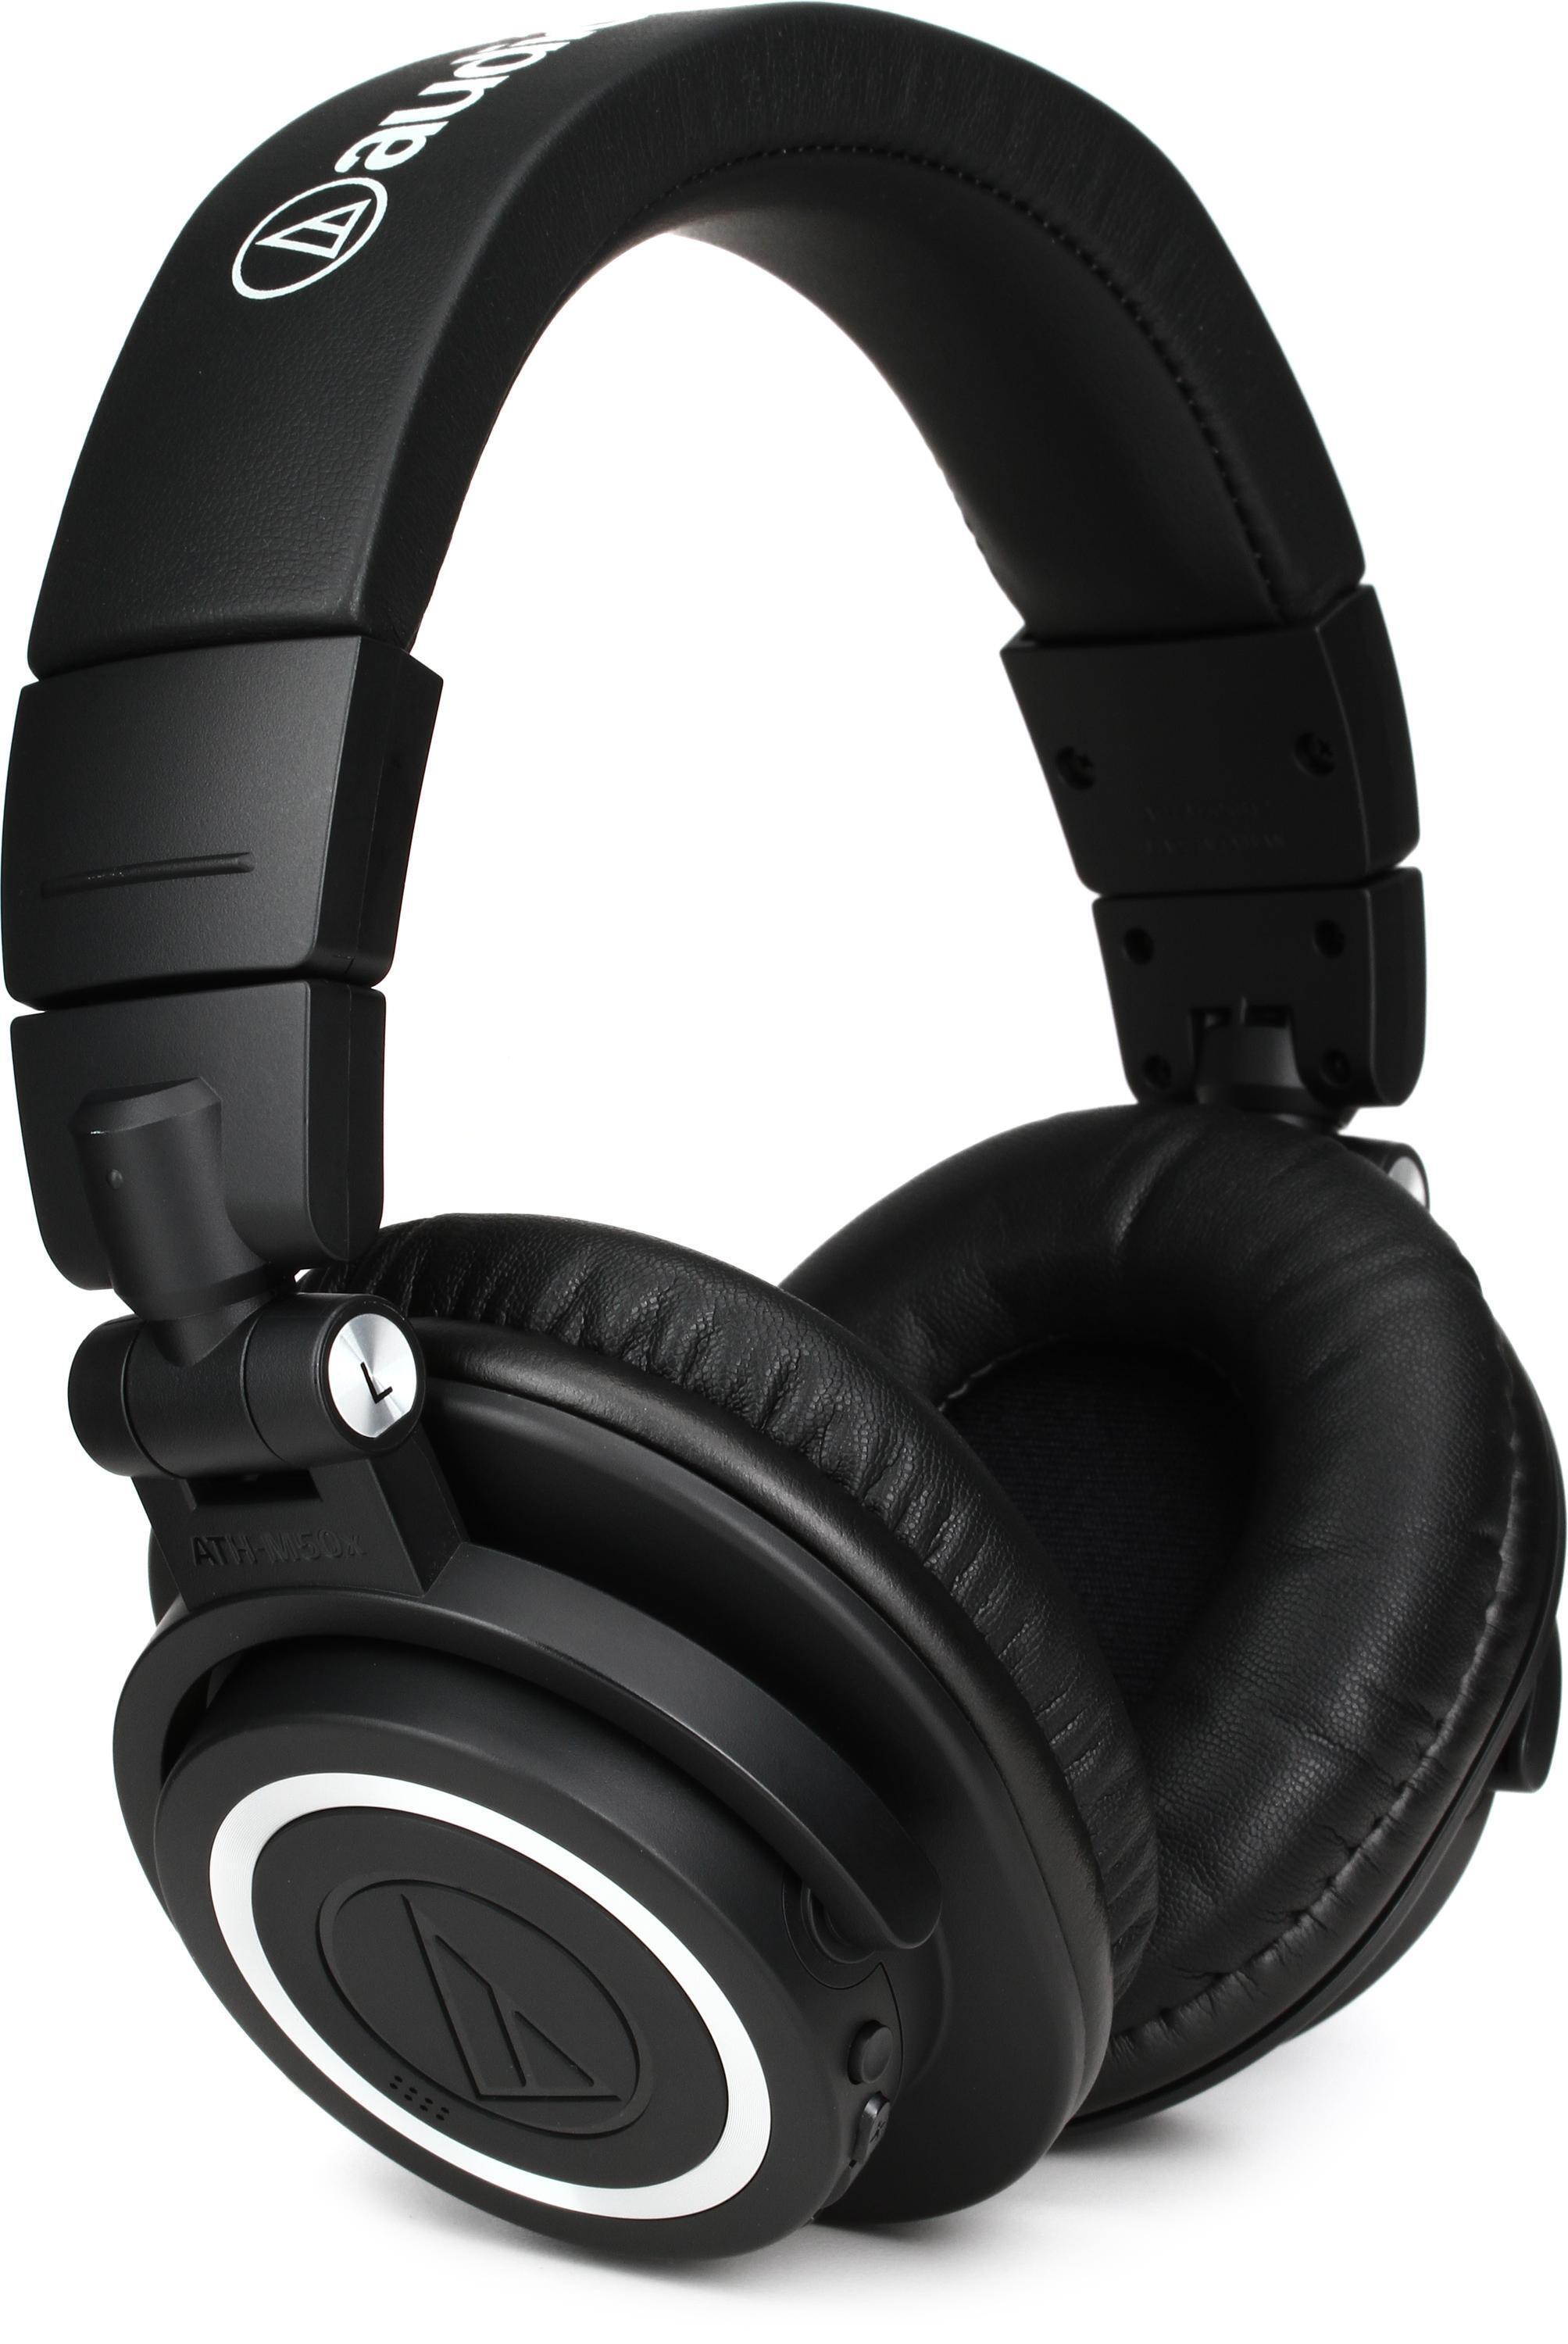 Audio Technica M50XBT2 Headphone Review and Feature Low Down